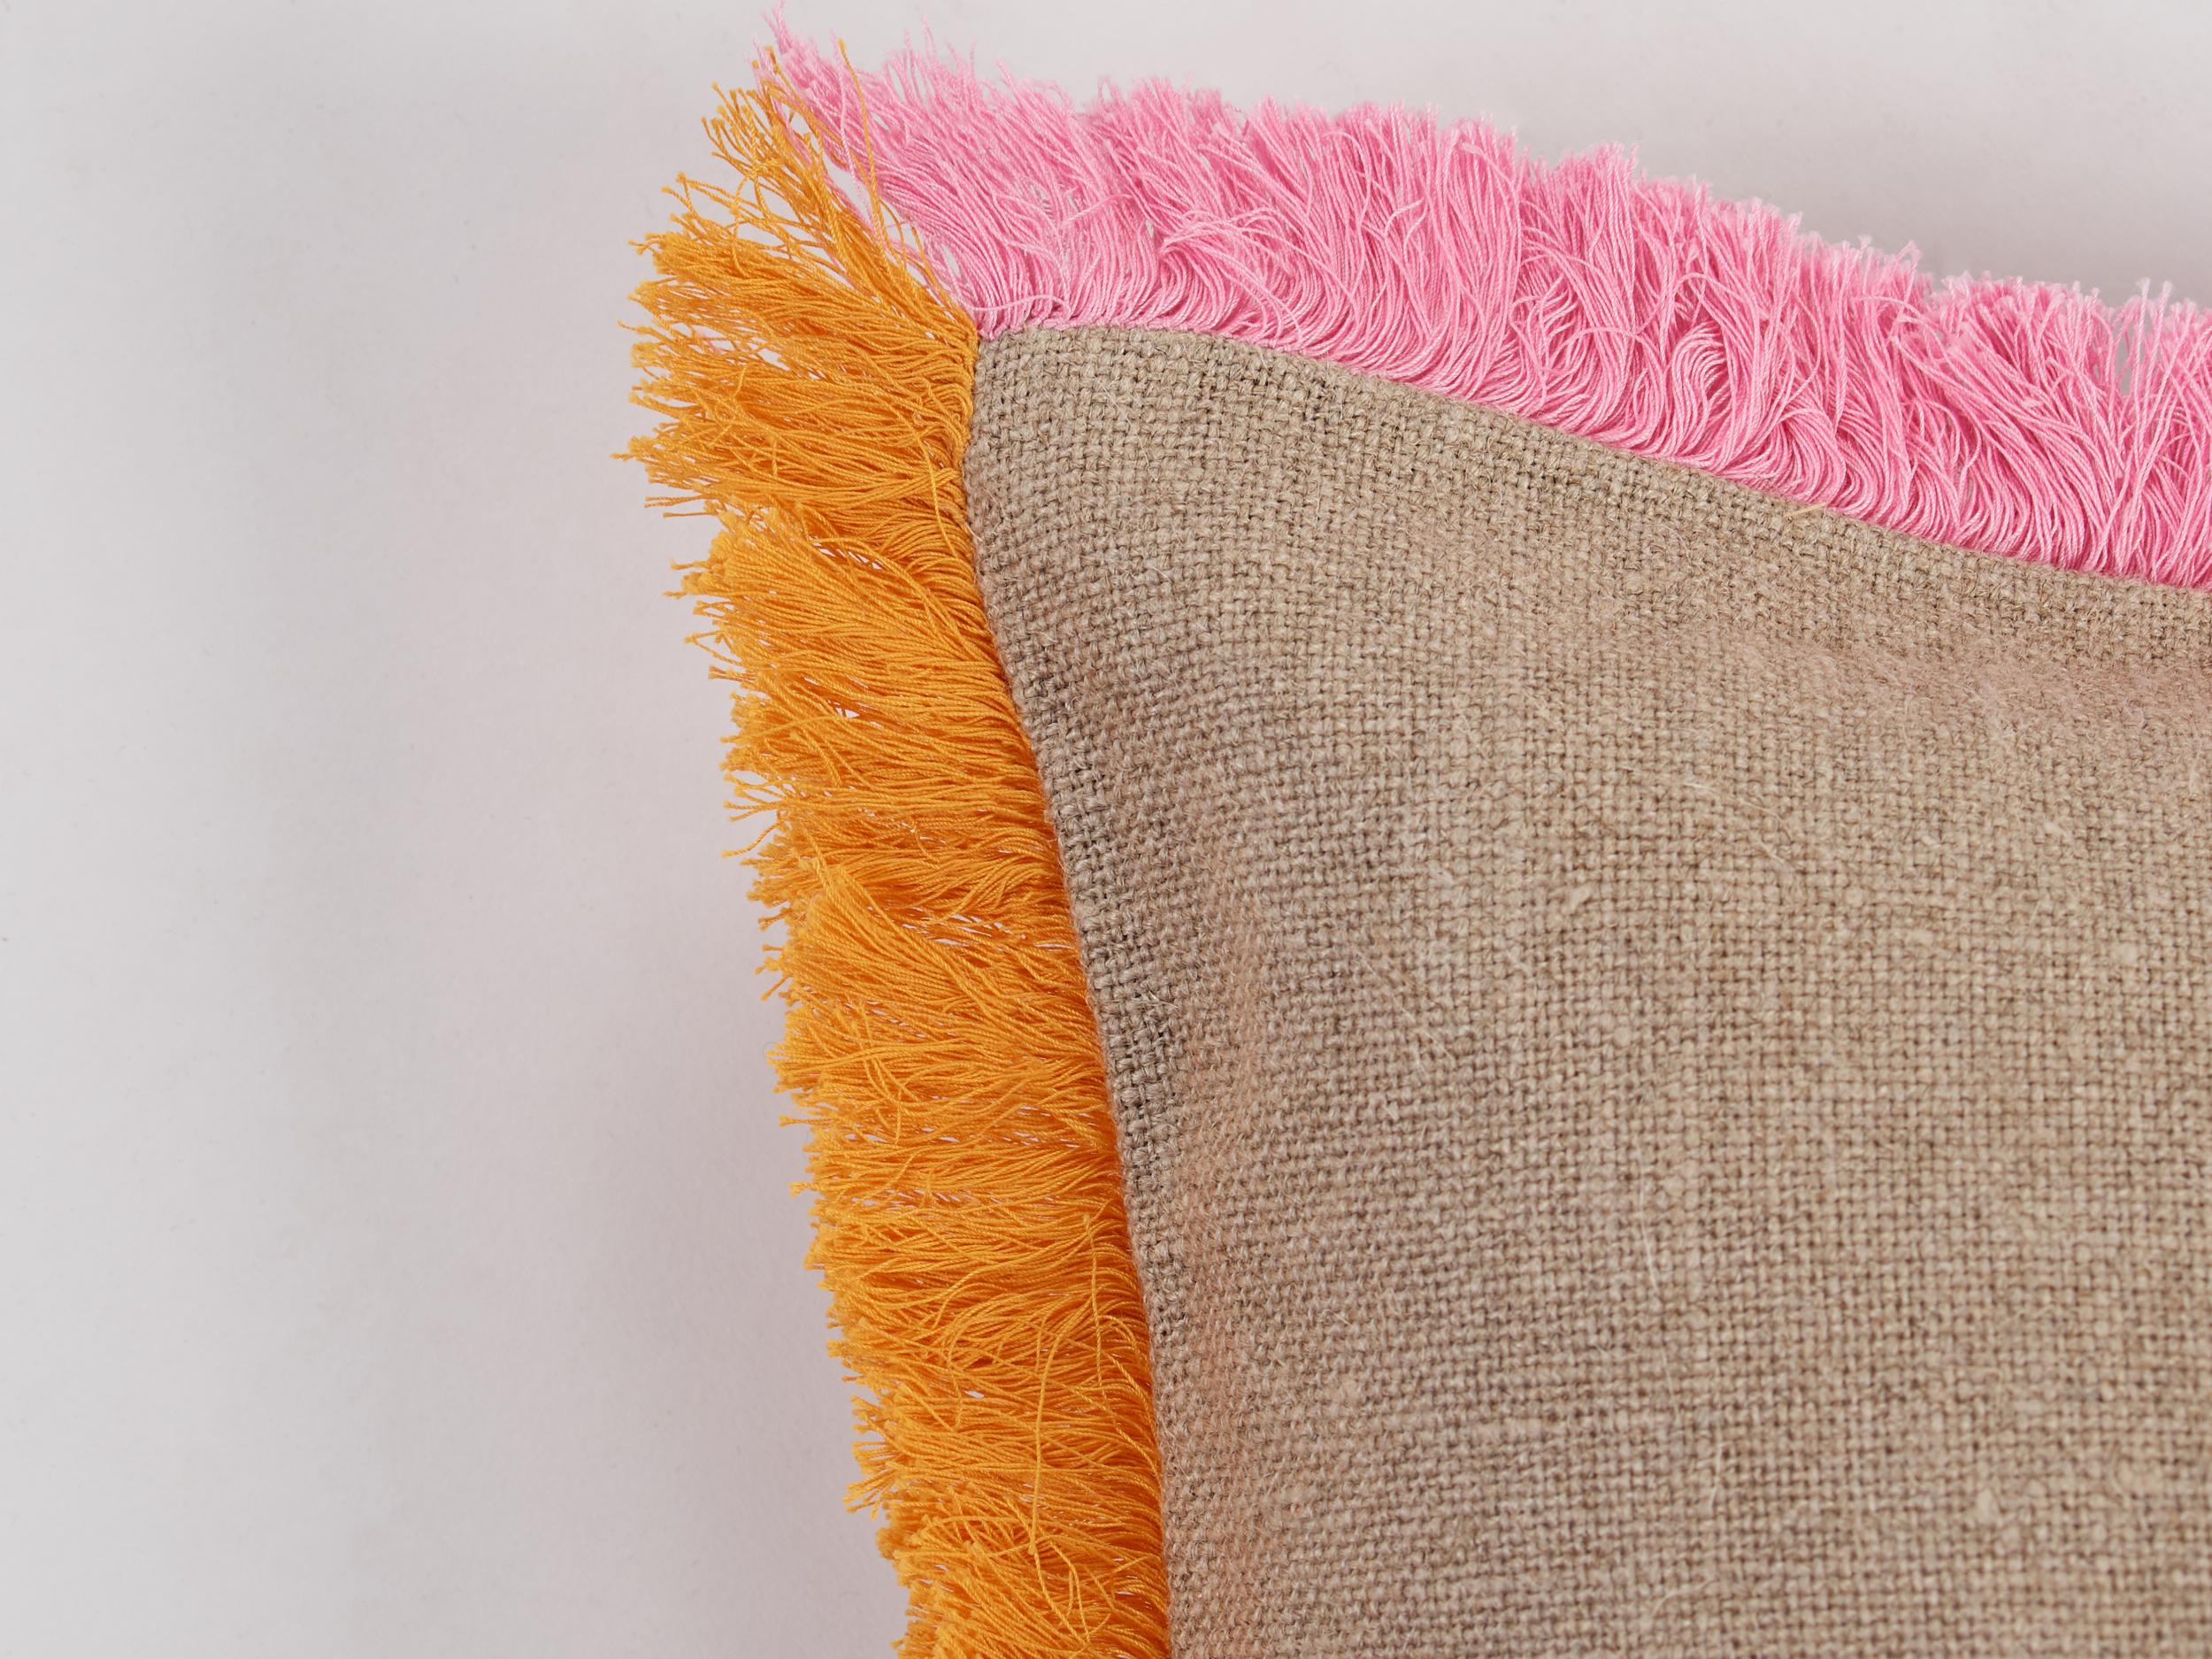 The pink and orange fringe border is entirely embroidered by hand on high quality natural linen. A cushion like this, can transform instantly a space.
Standard size 50 x 50 cm. Customizable in other sizes and/or color combinations on